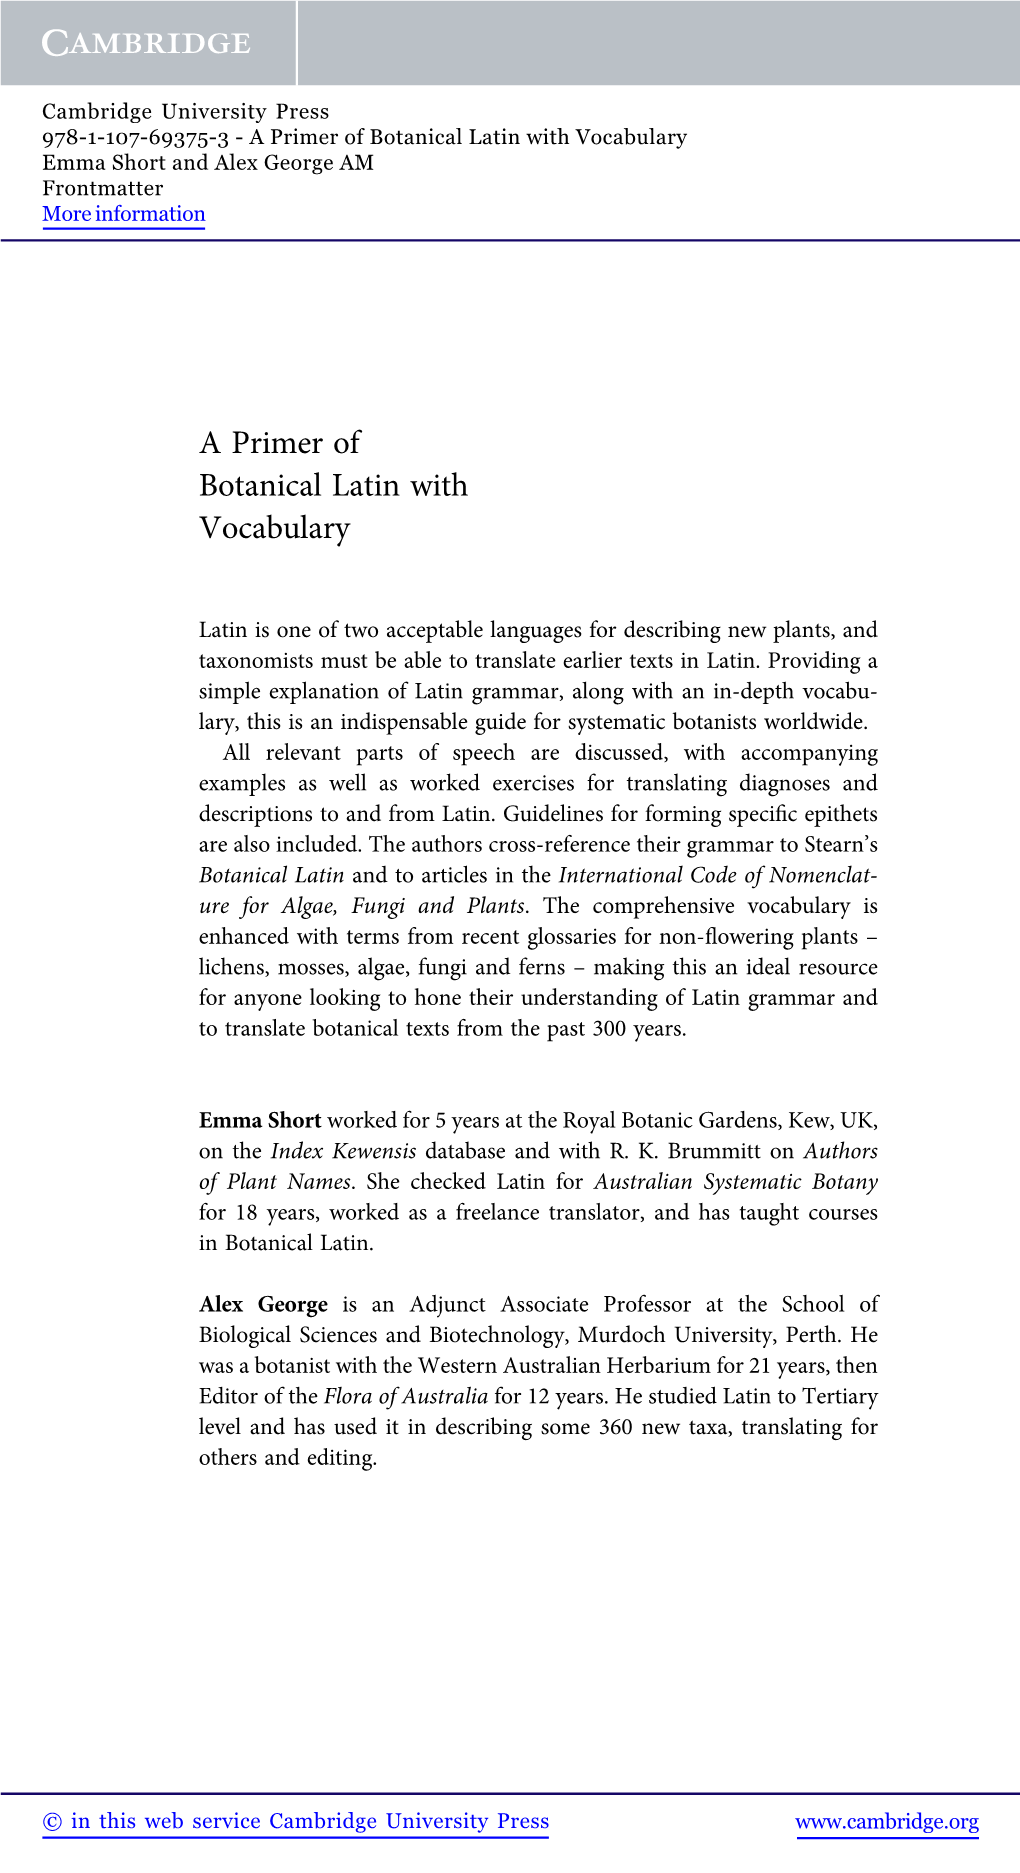 A Primer of Botanical Latin with Vocabulary Emma Short and Alex George AM Frontmatter More Information